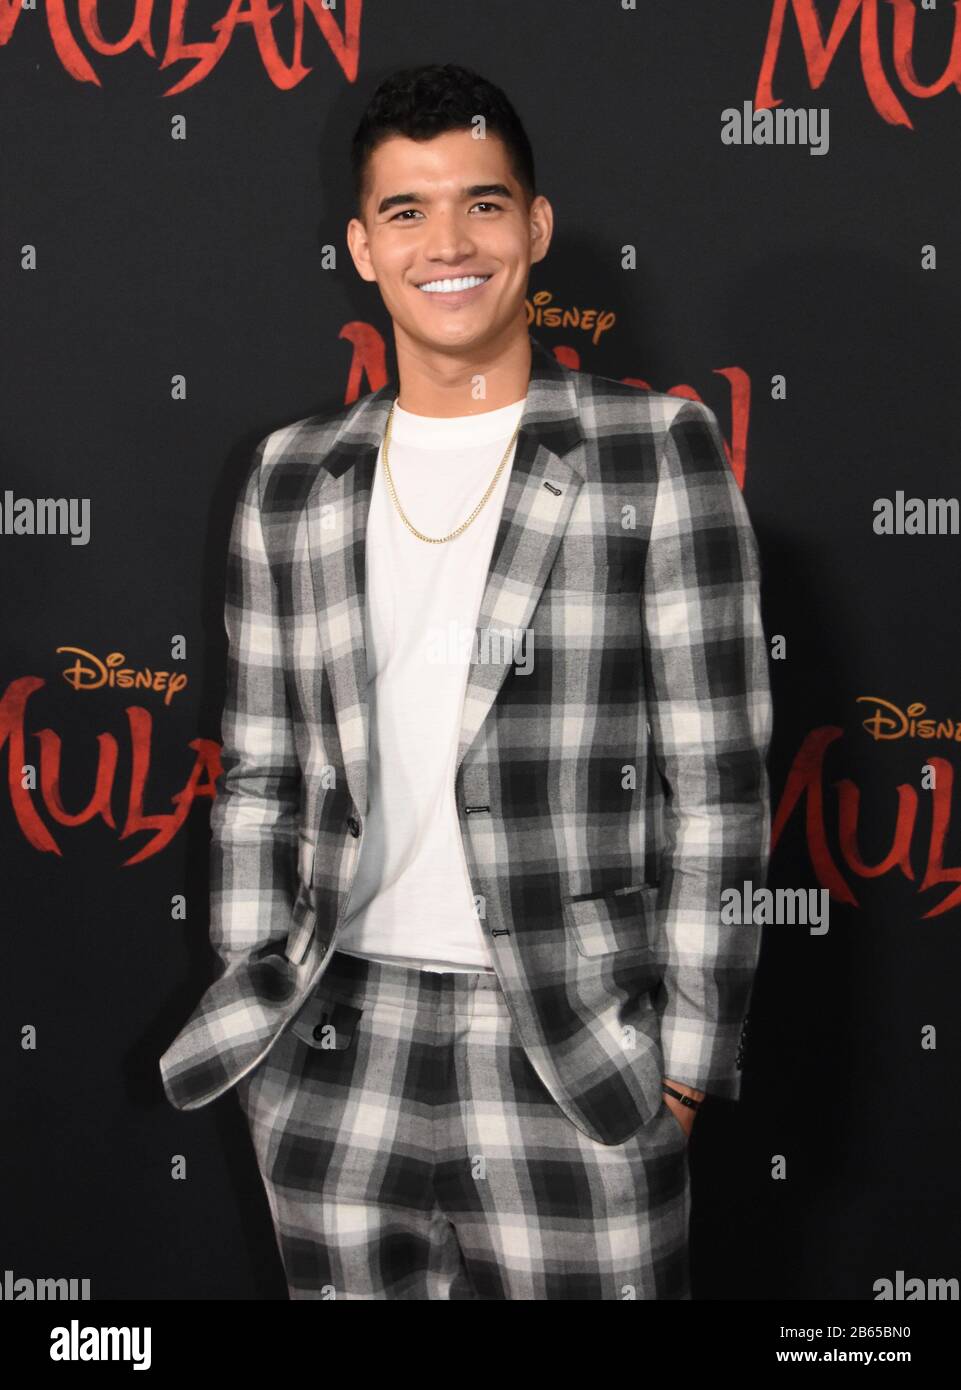 Hollywood, California, USA 9th March 2020 YouTuber Alex Burriss, aka Alex  Wassabi attends the World Premiere of Disney's 'Mulan' on March 9, 2020 at  the Dolby Theatre in Hollywood, California, USA. Photo